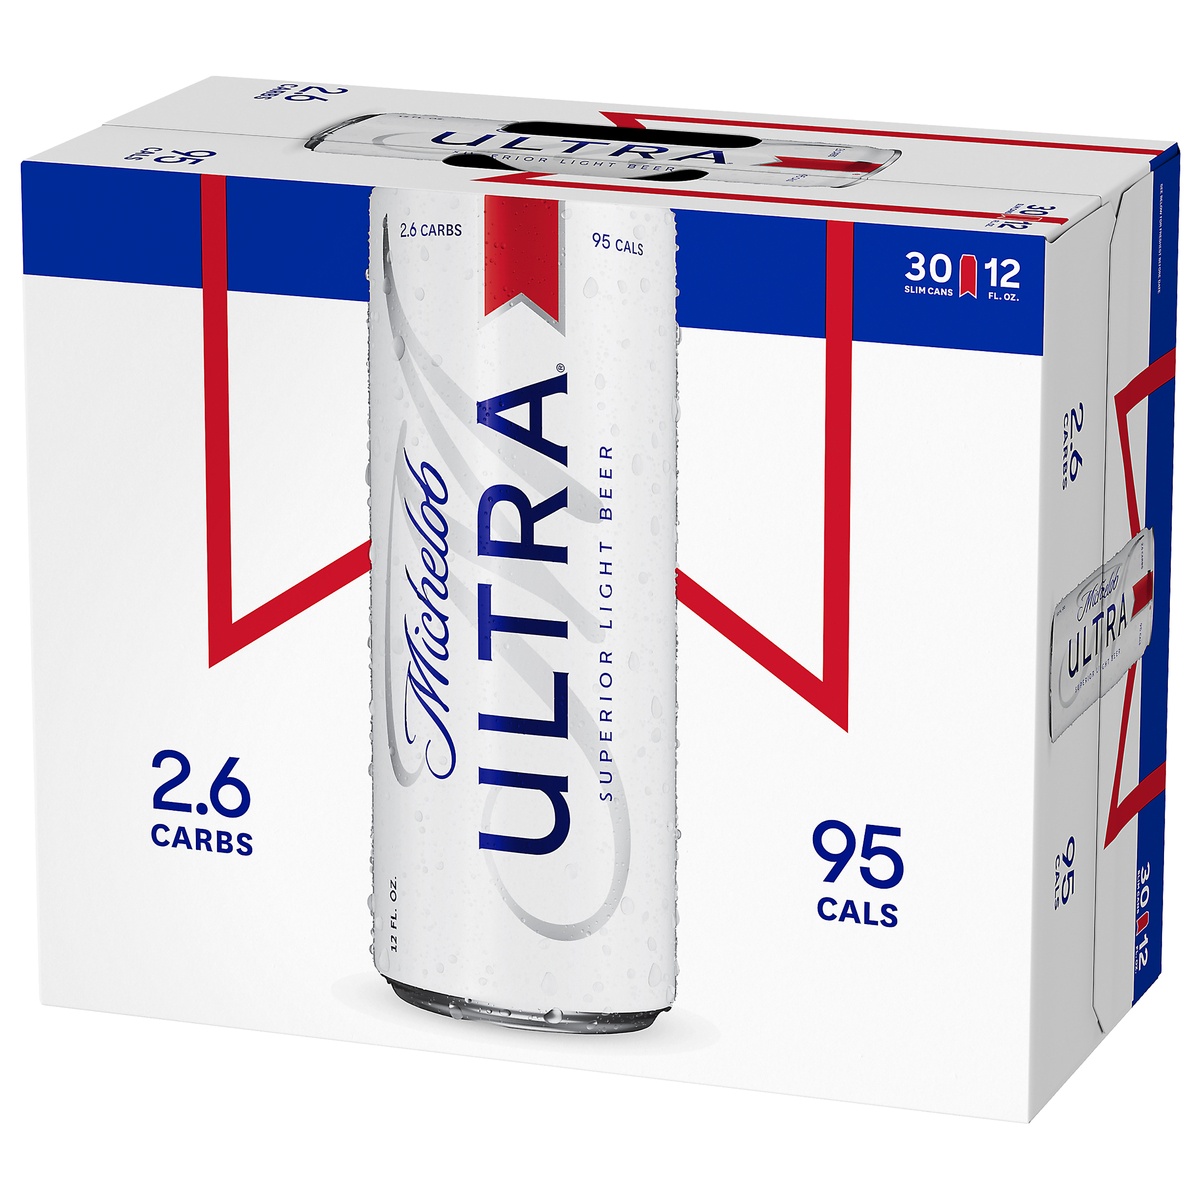 Michelob Ultra 30 Pack Price - How do you Price a Switches?